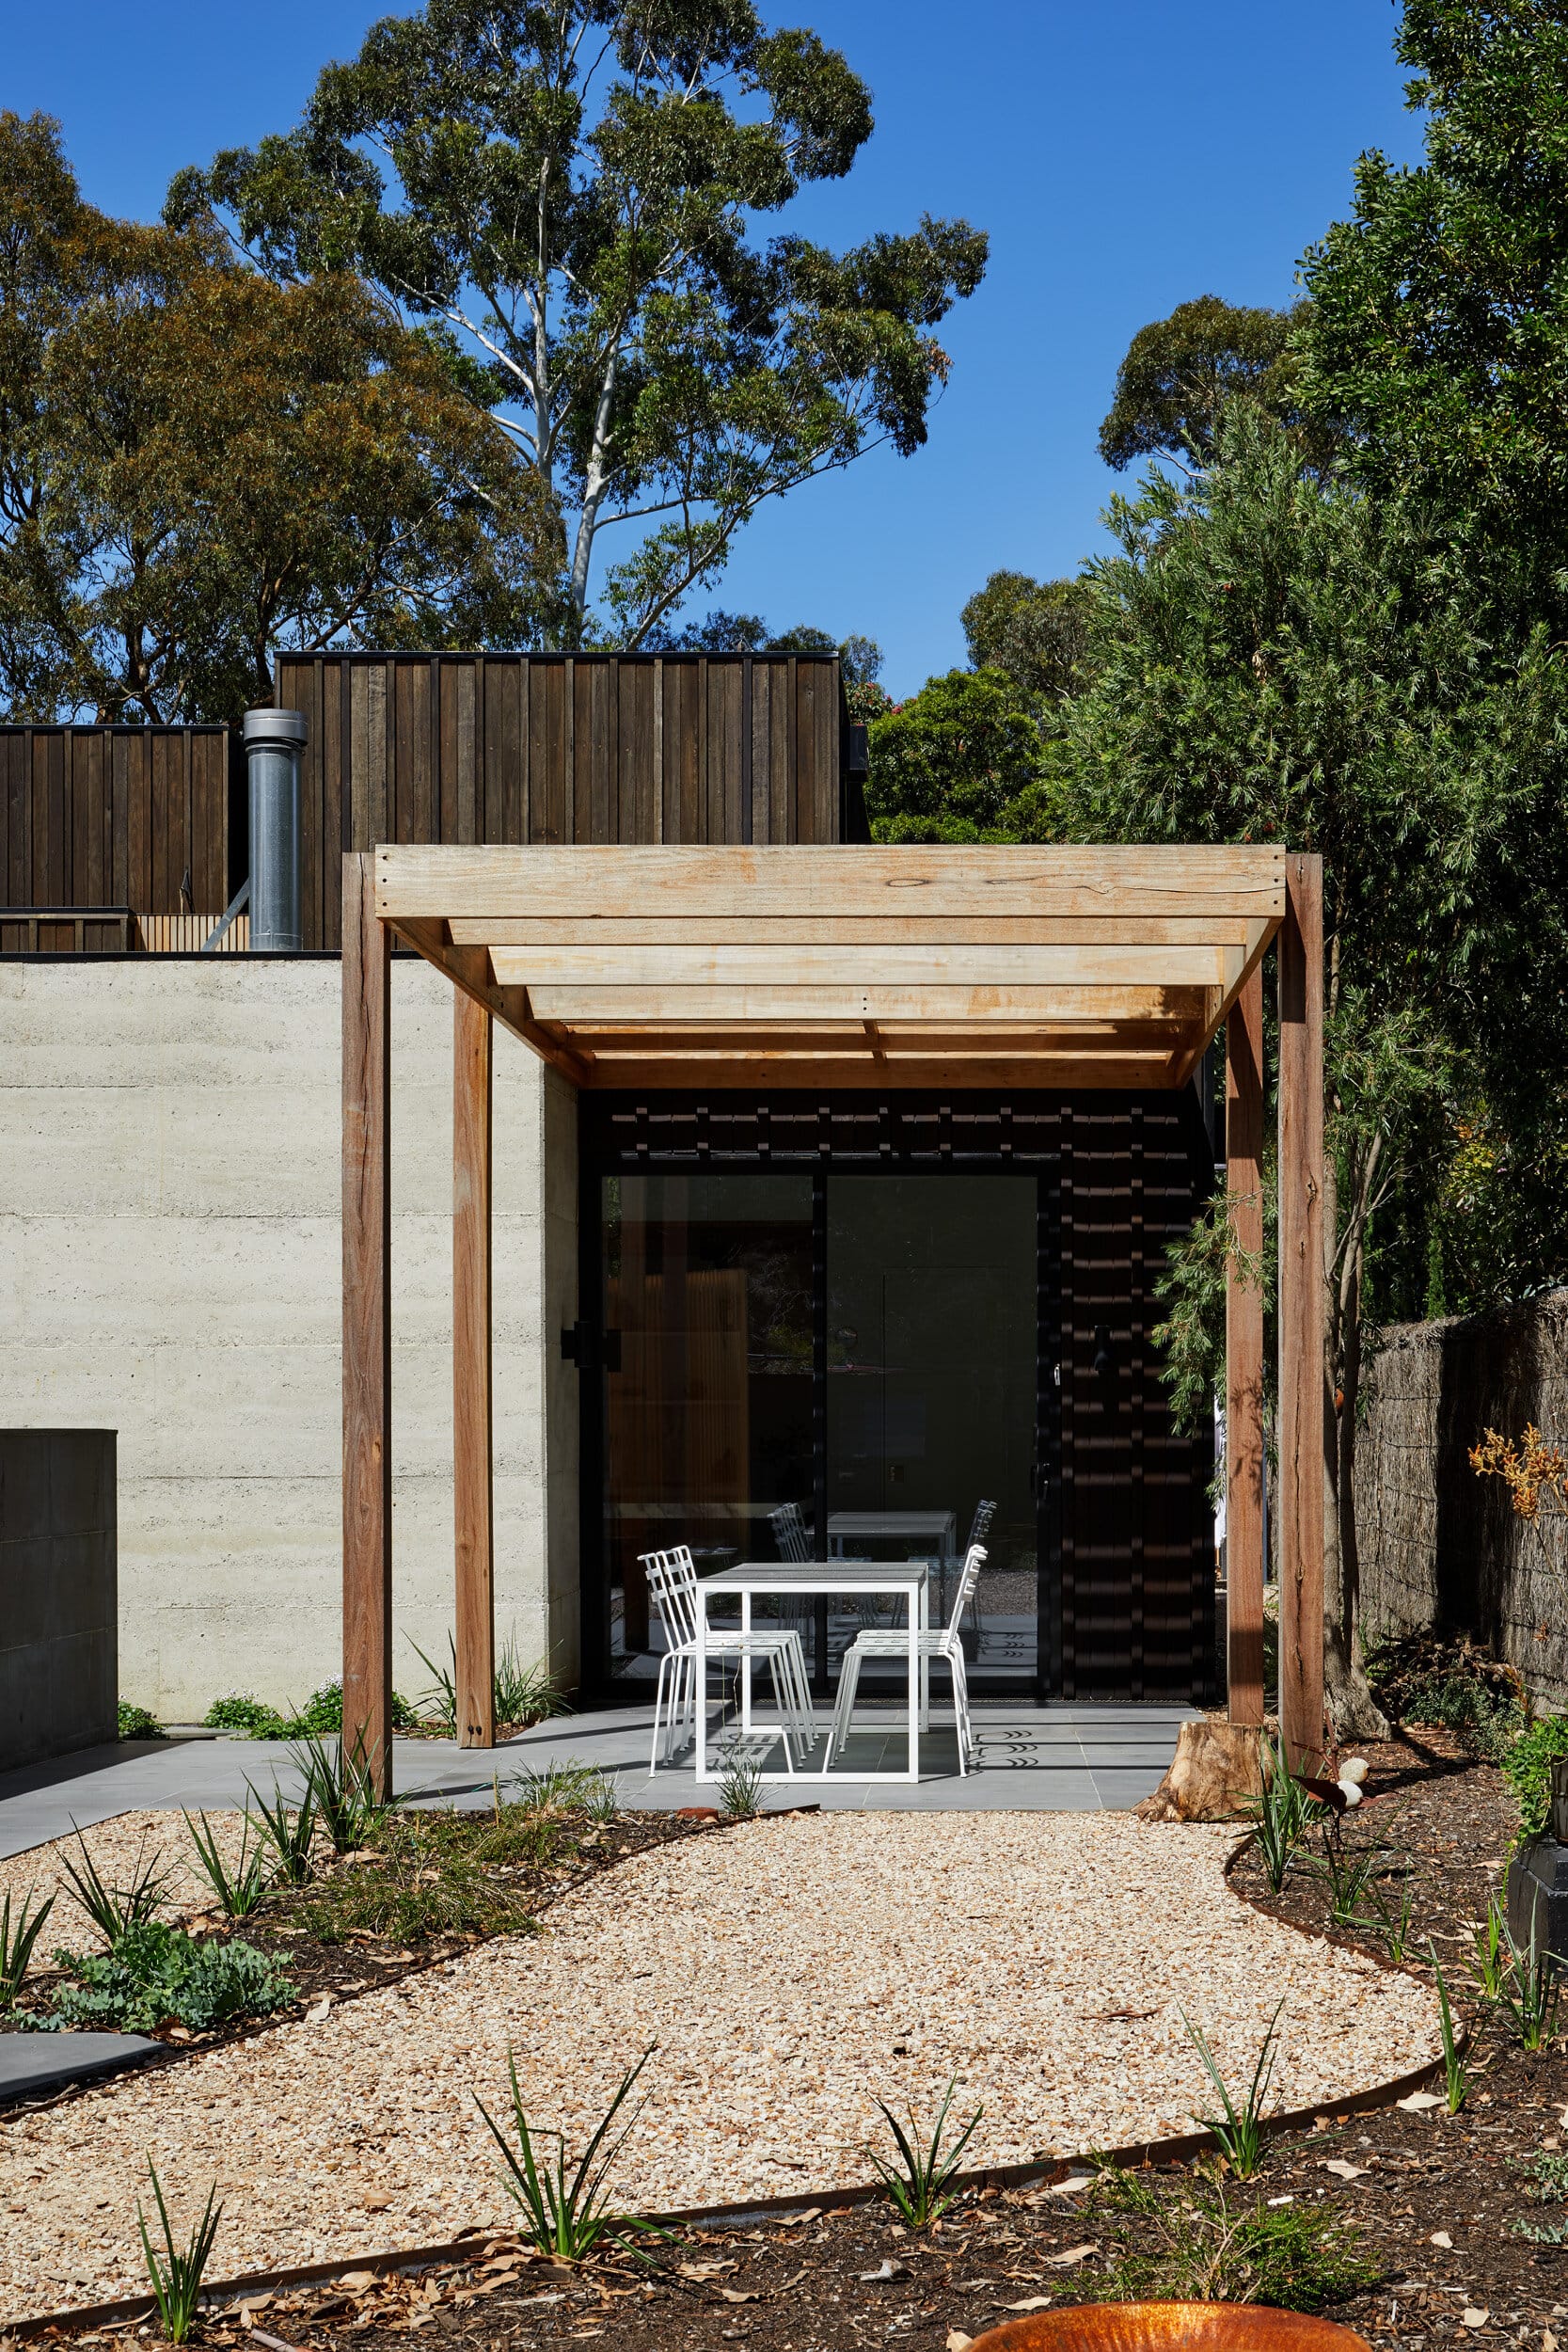 Laurel Grove by Kirsten Johnstone Architecture. Photography by Tatjana Plitt. Outdoor pation with concrete floor and timber pergola. Garden landscaped with stones, plants and pathways.